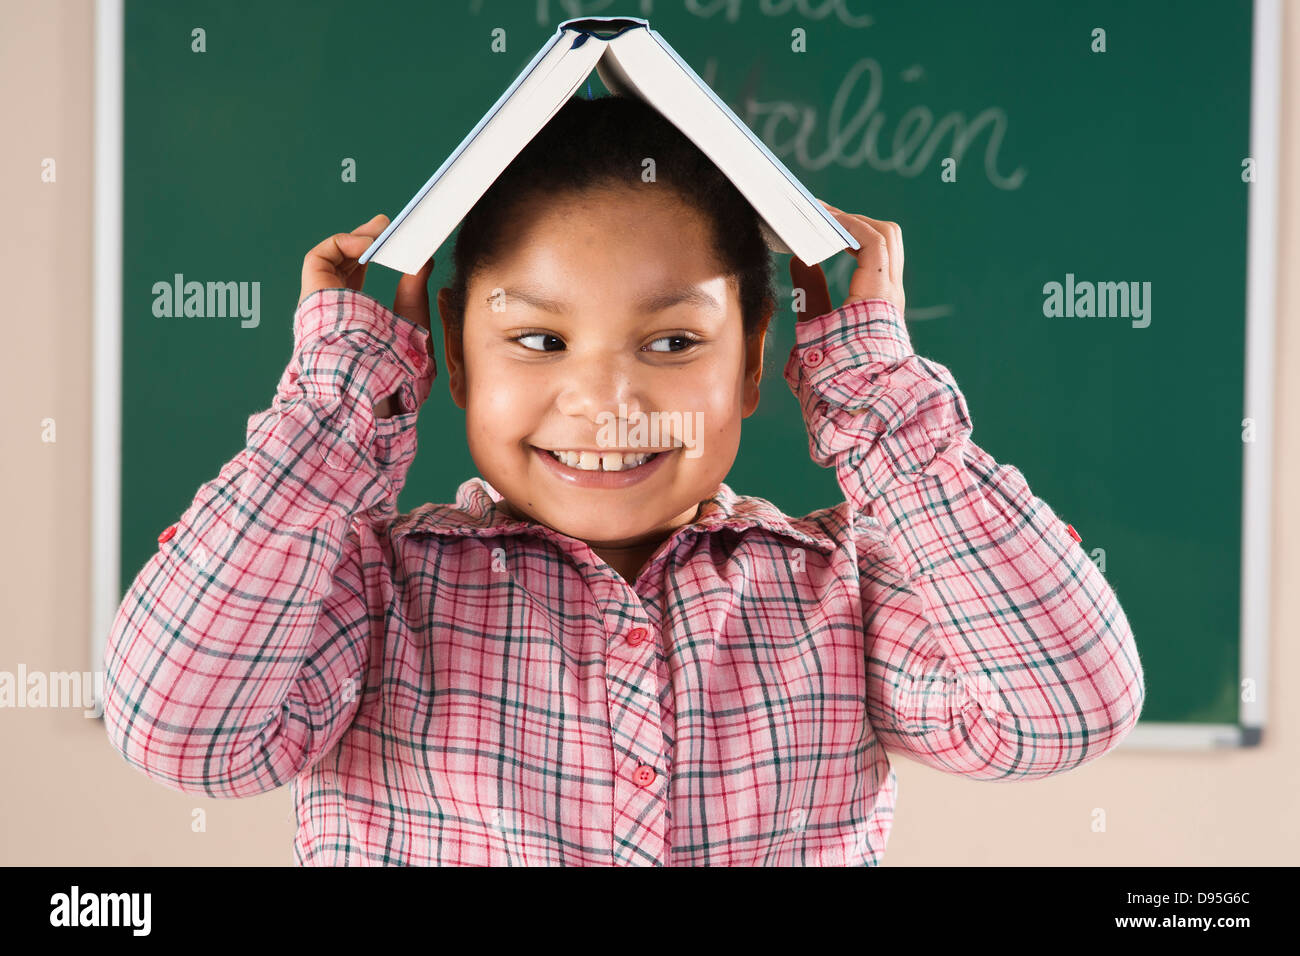 Girl With Textbook on her Head in Classroom, Baden-Wurttemberg, Germany Stock Photo